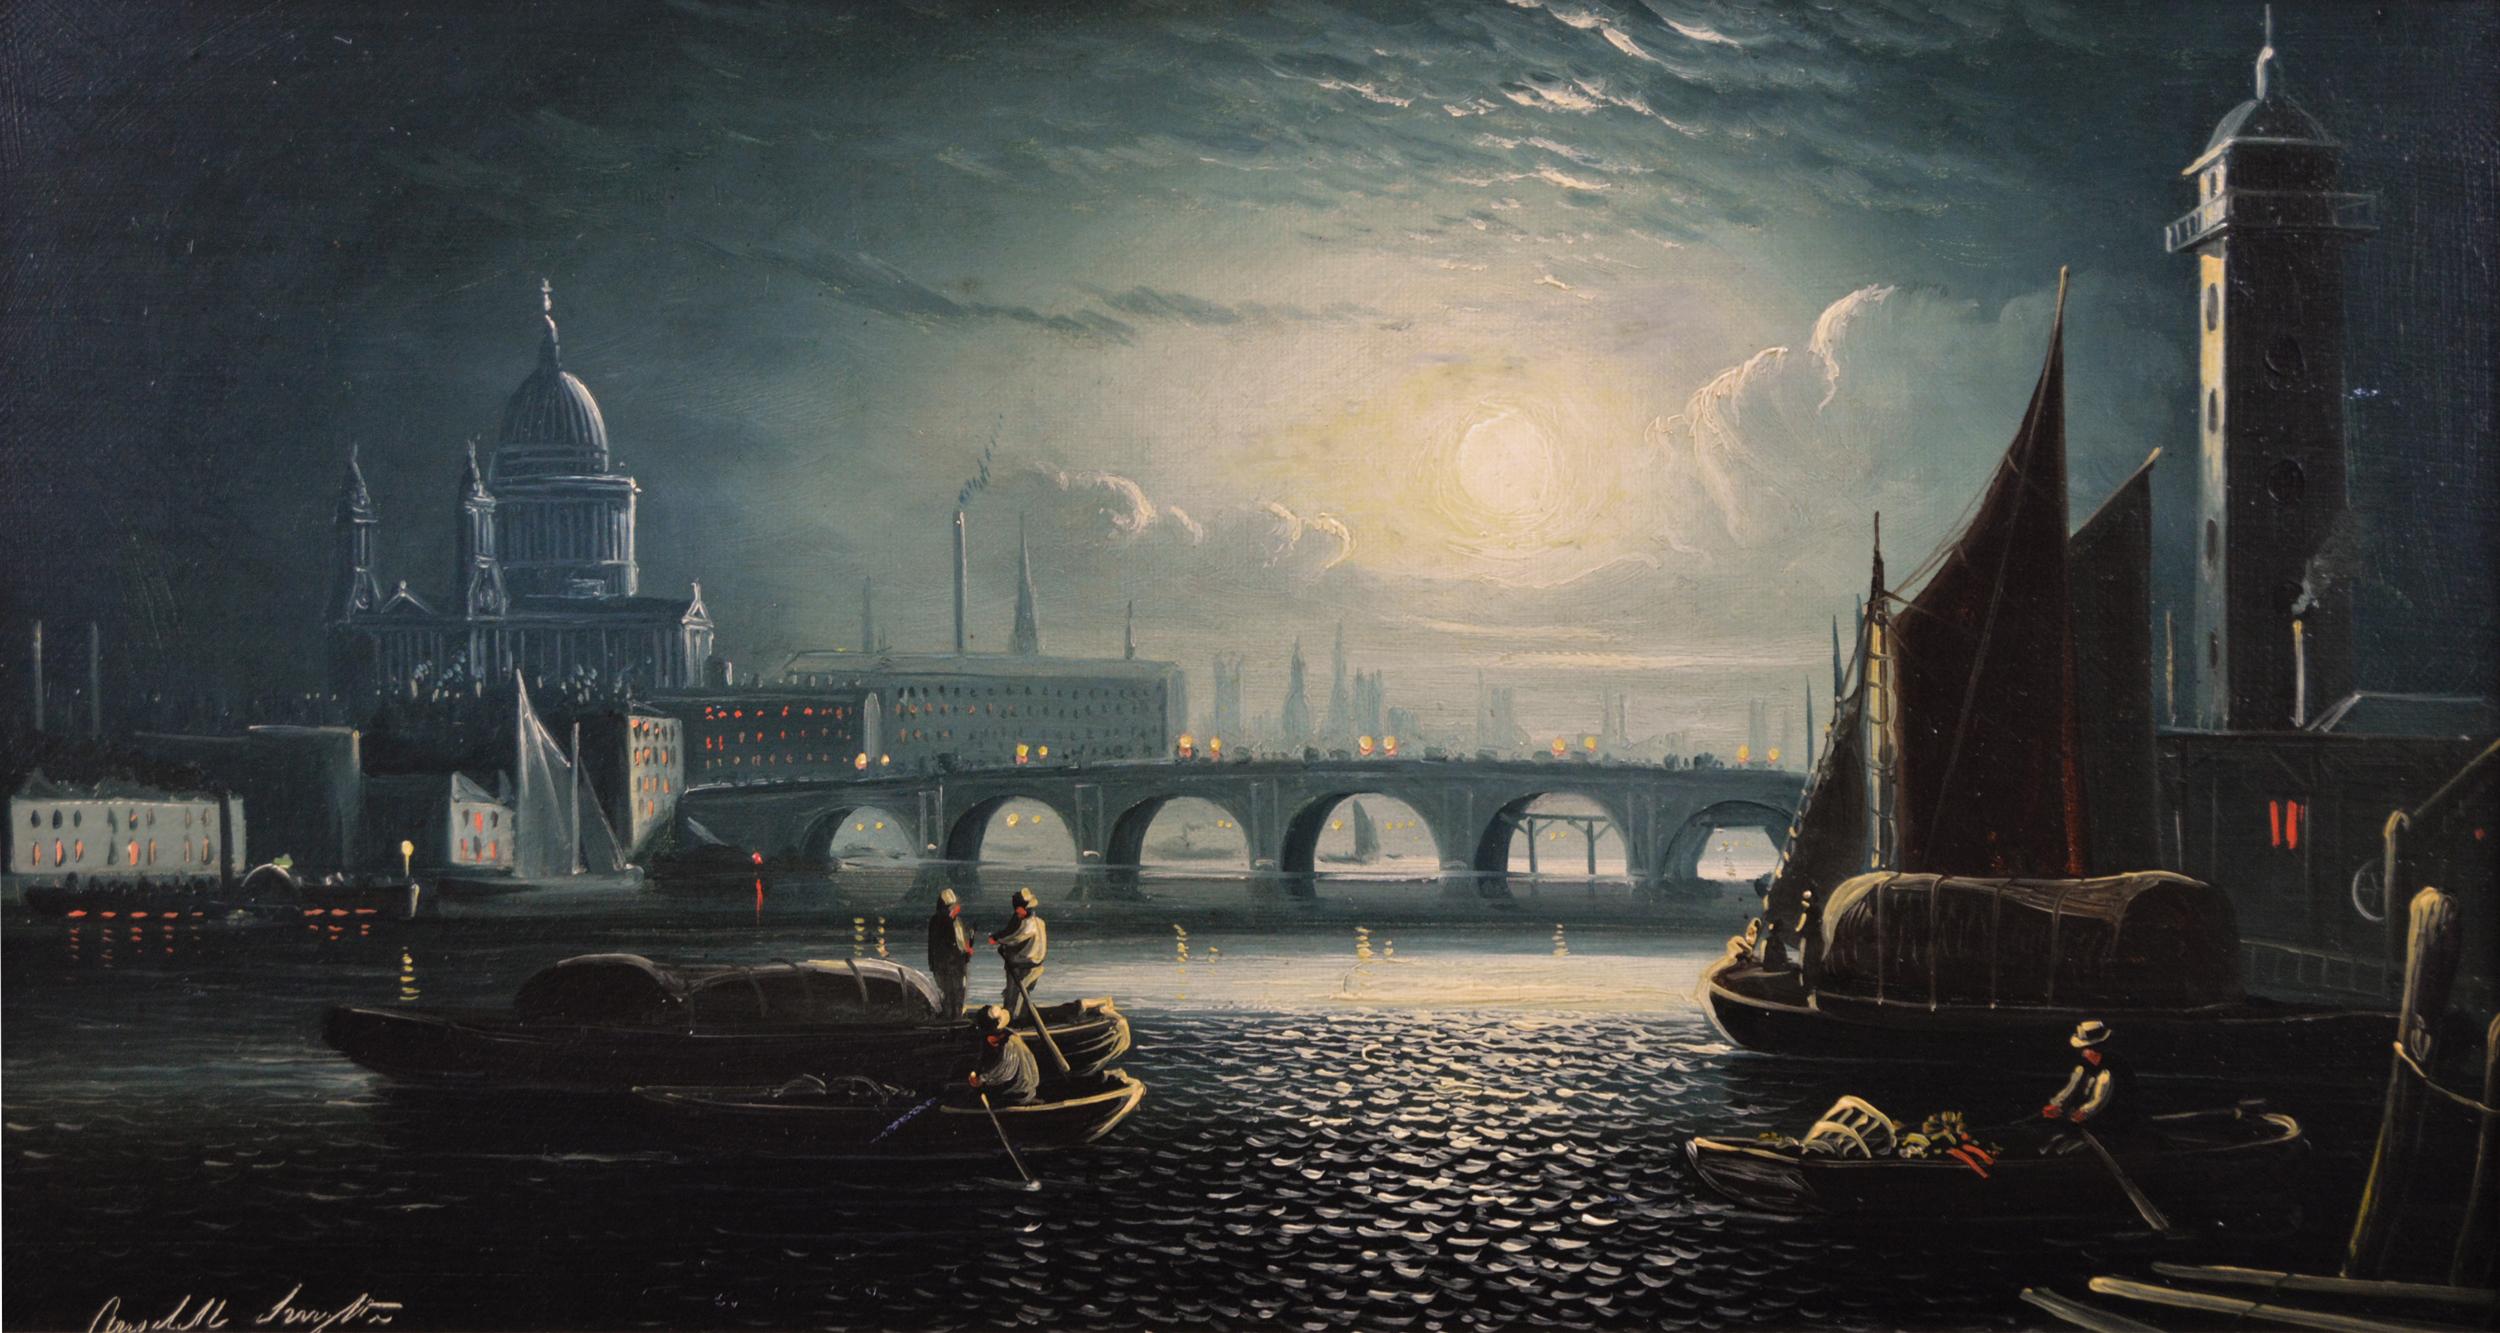 Houses of Parliament & St Paul’s Cathedral, pair - Painting by Ansdell Smythe